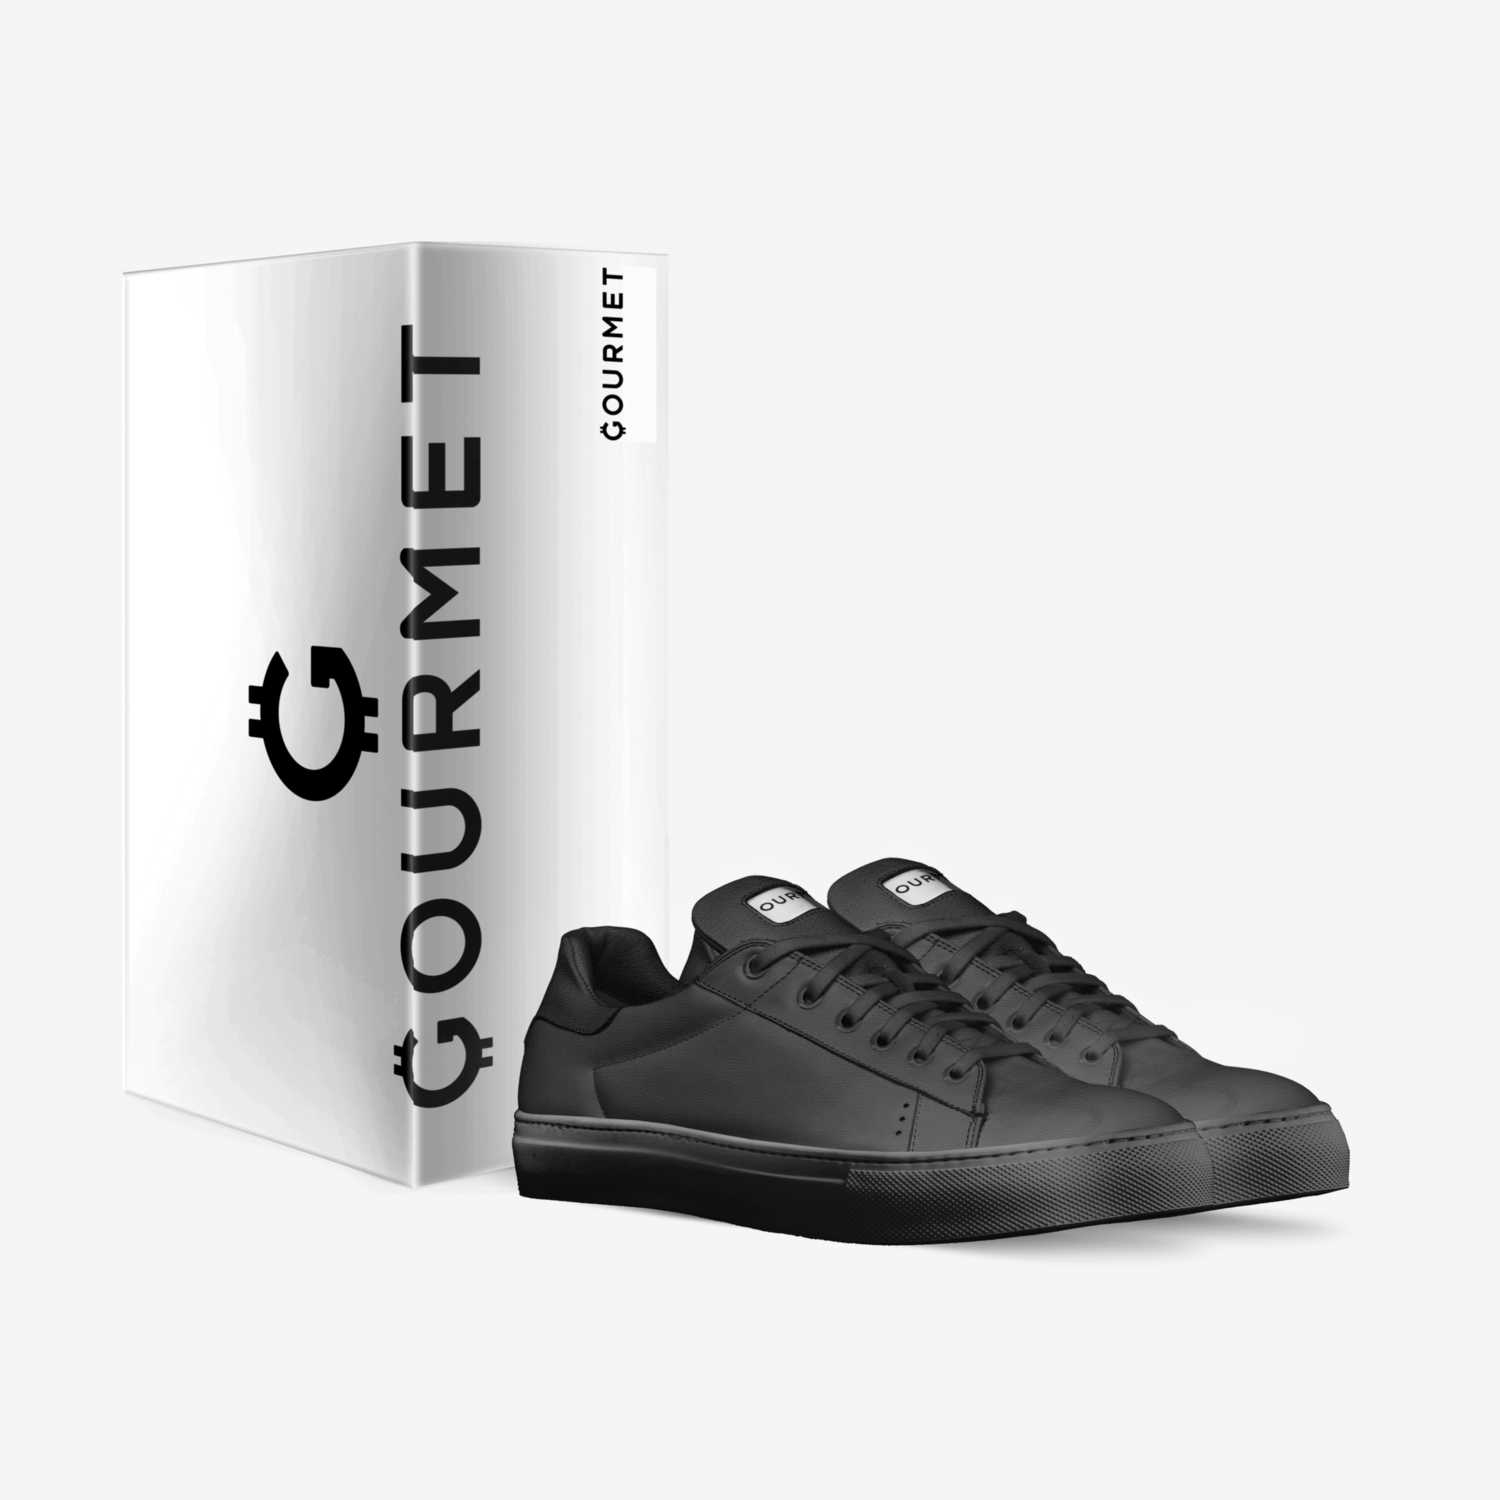 Gourmet | A Custom Shoe concept by Stan